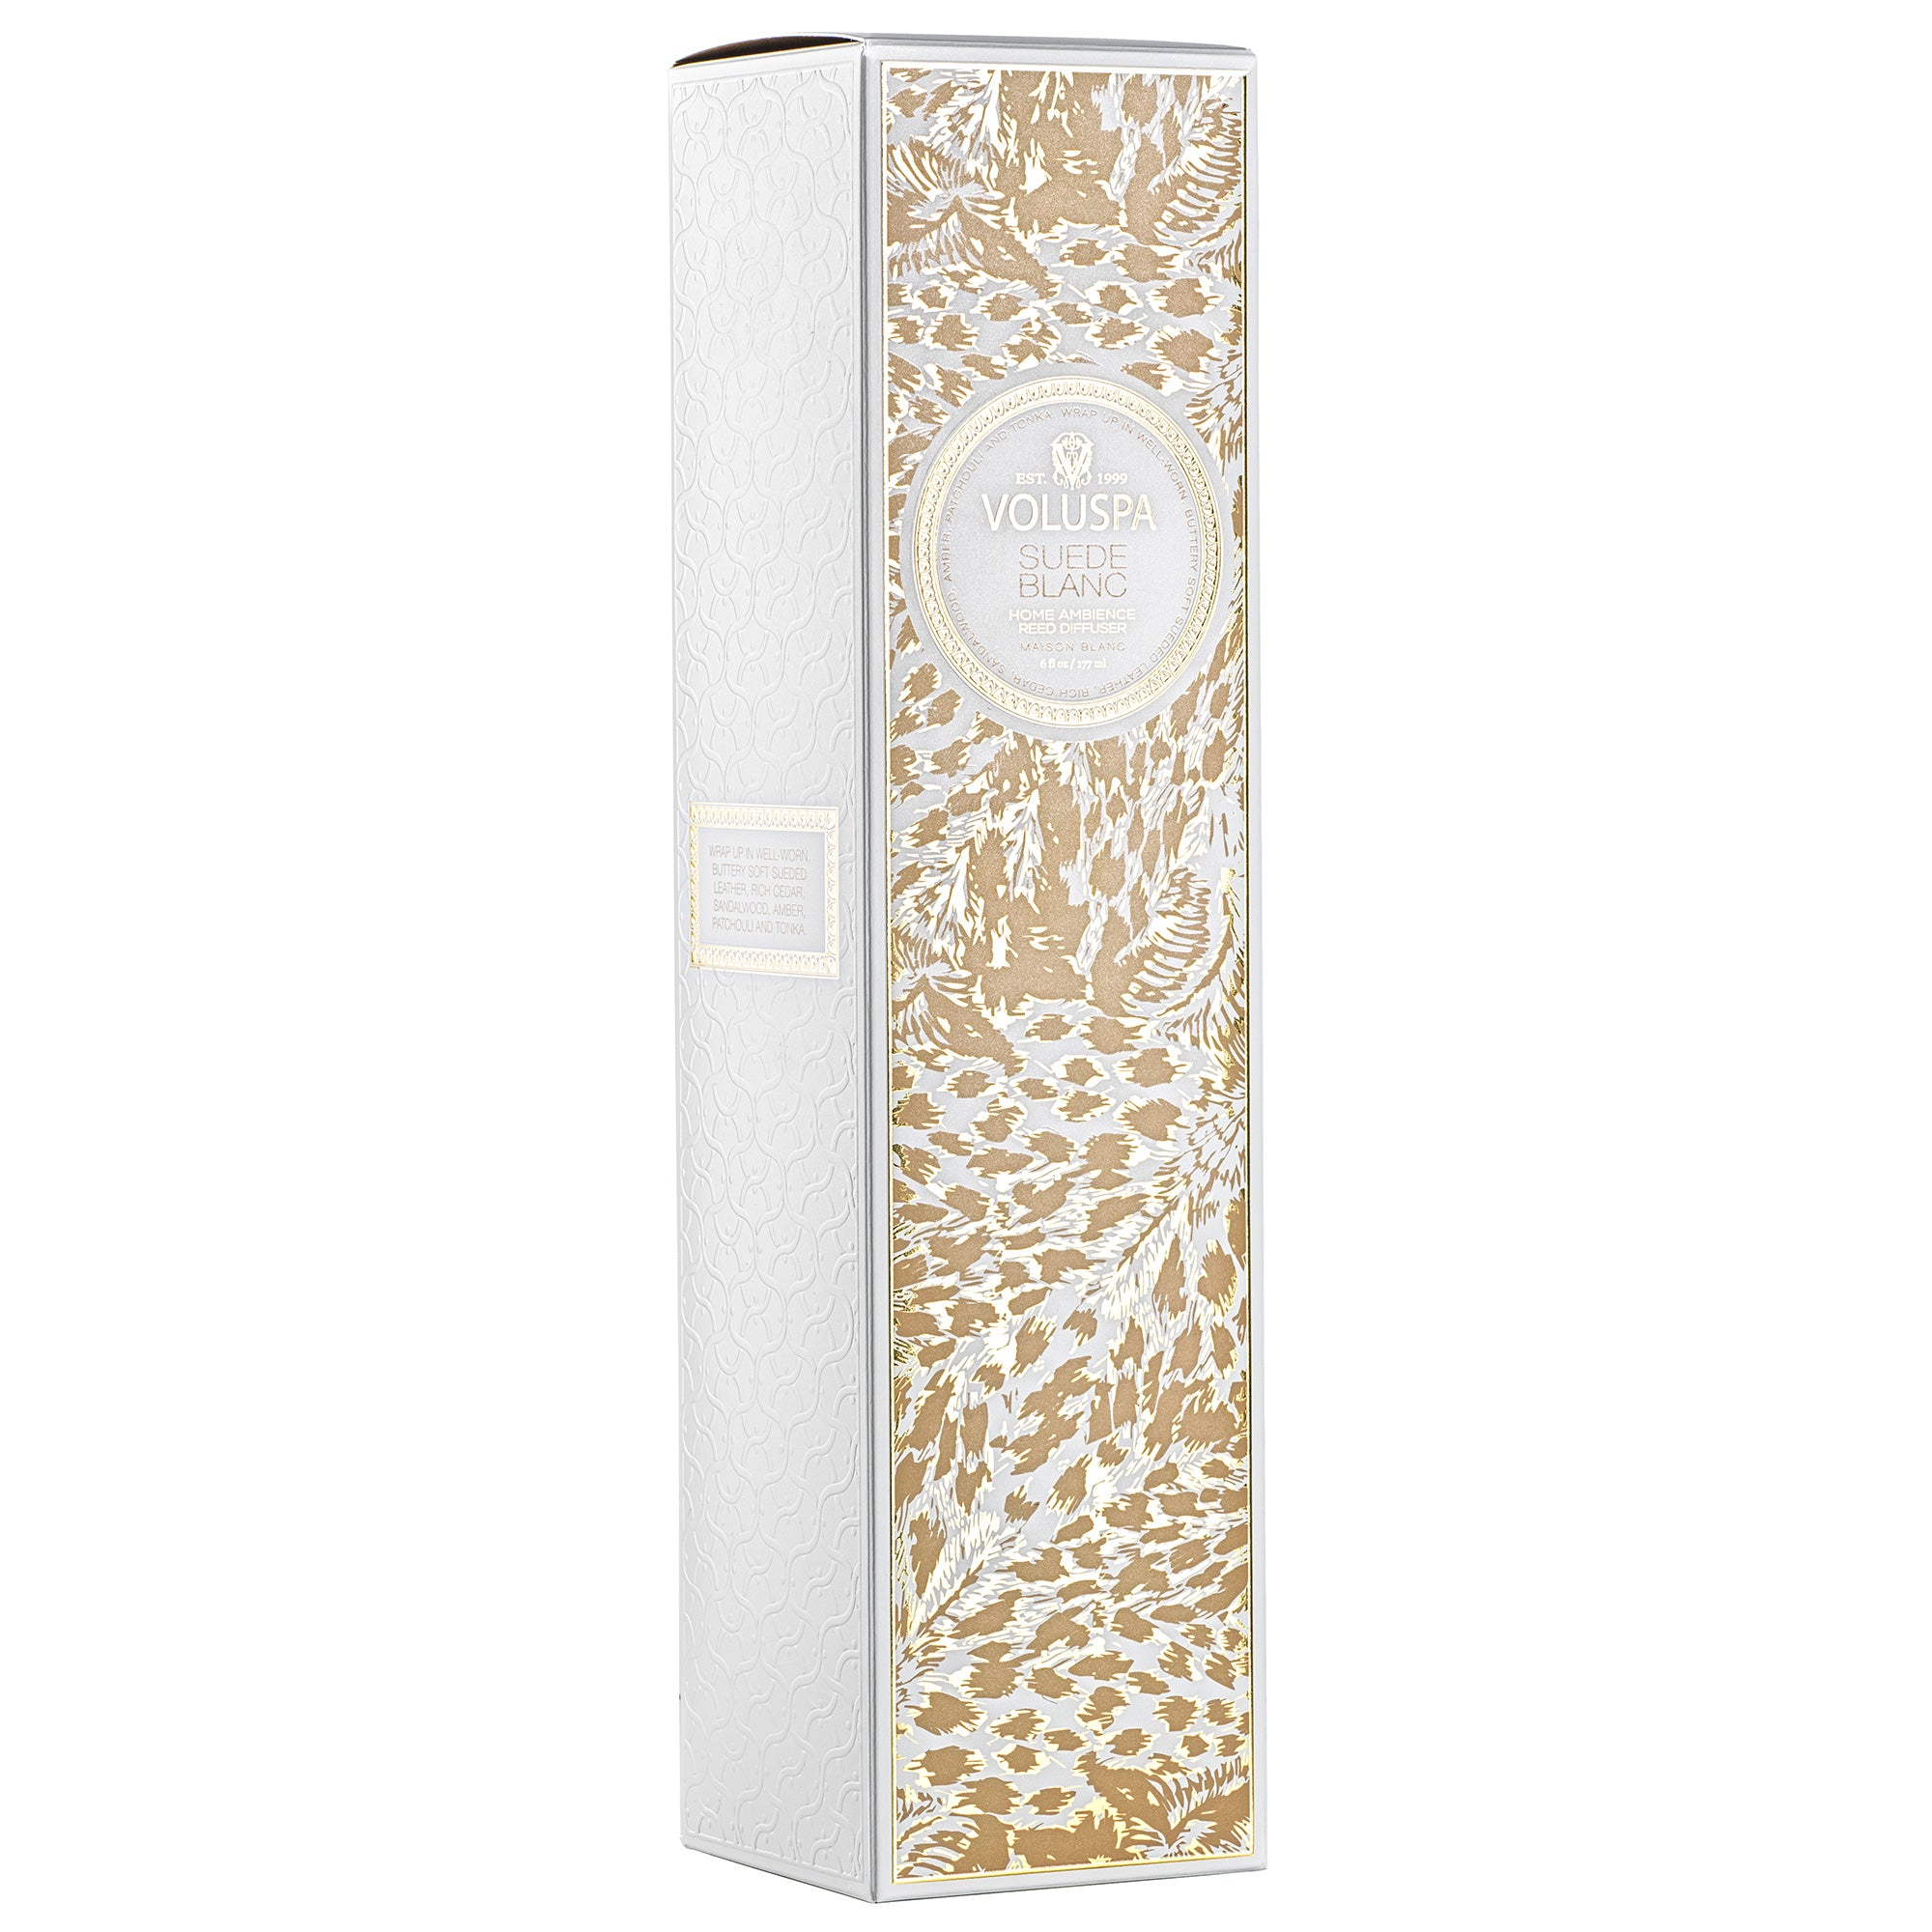 Suede Blanc - Reed Diffuser